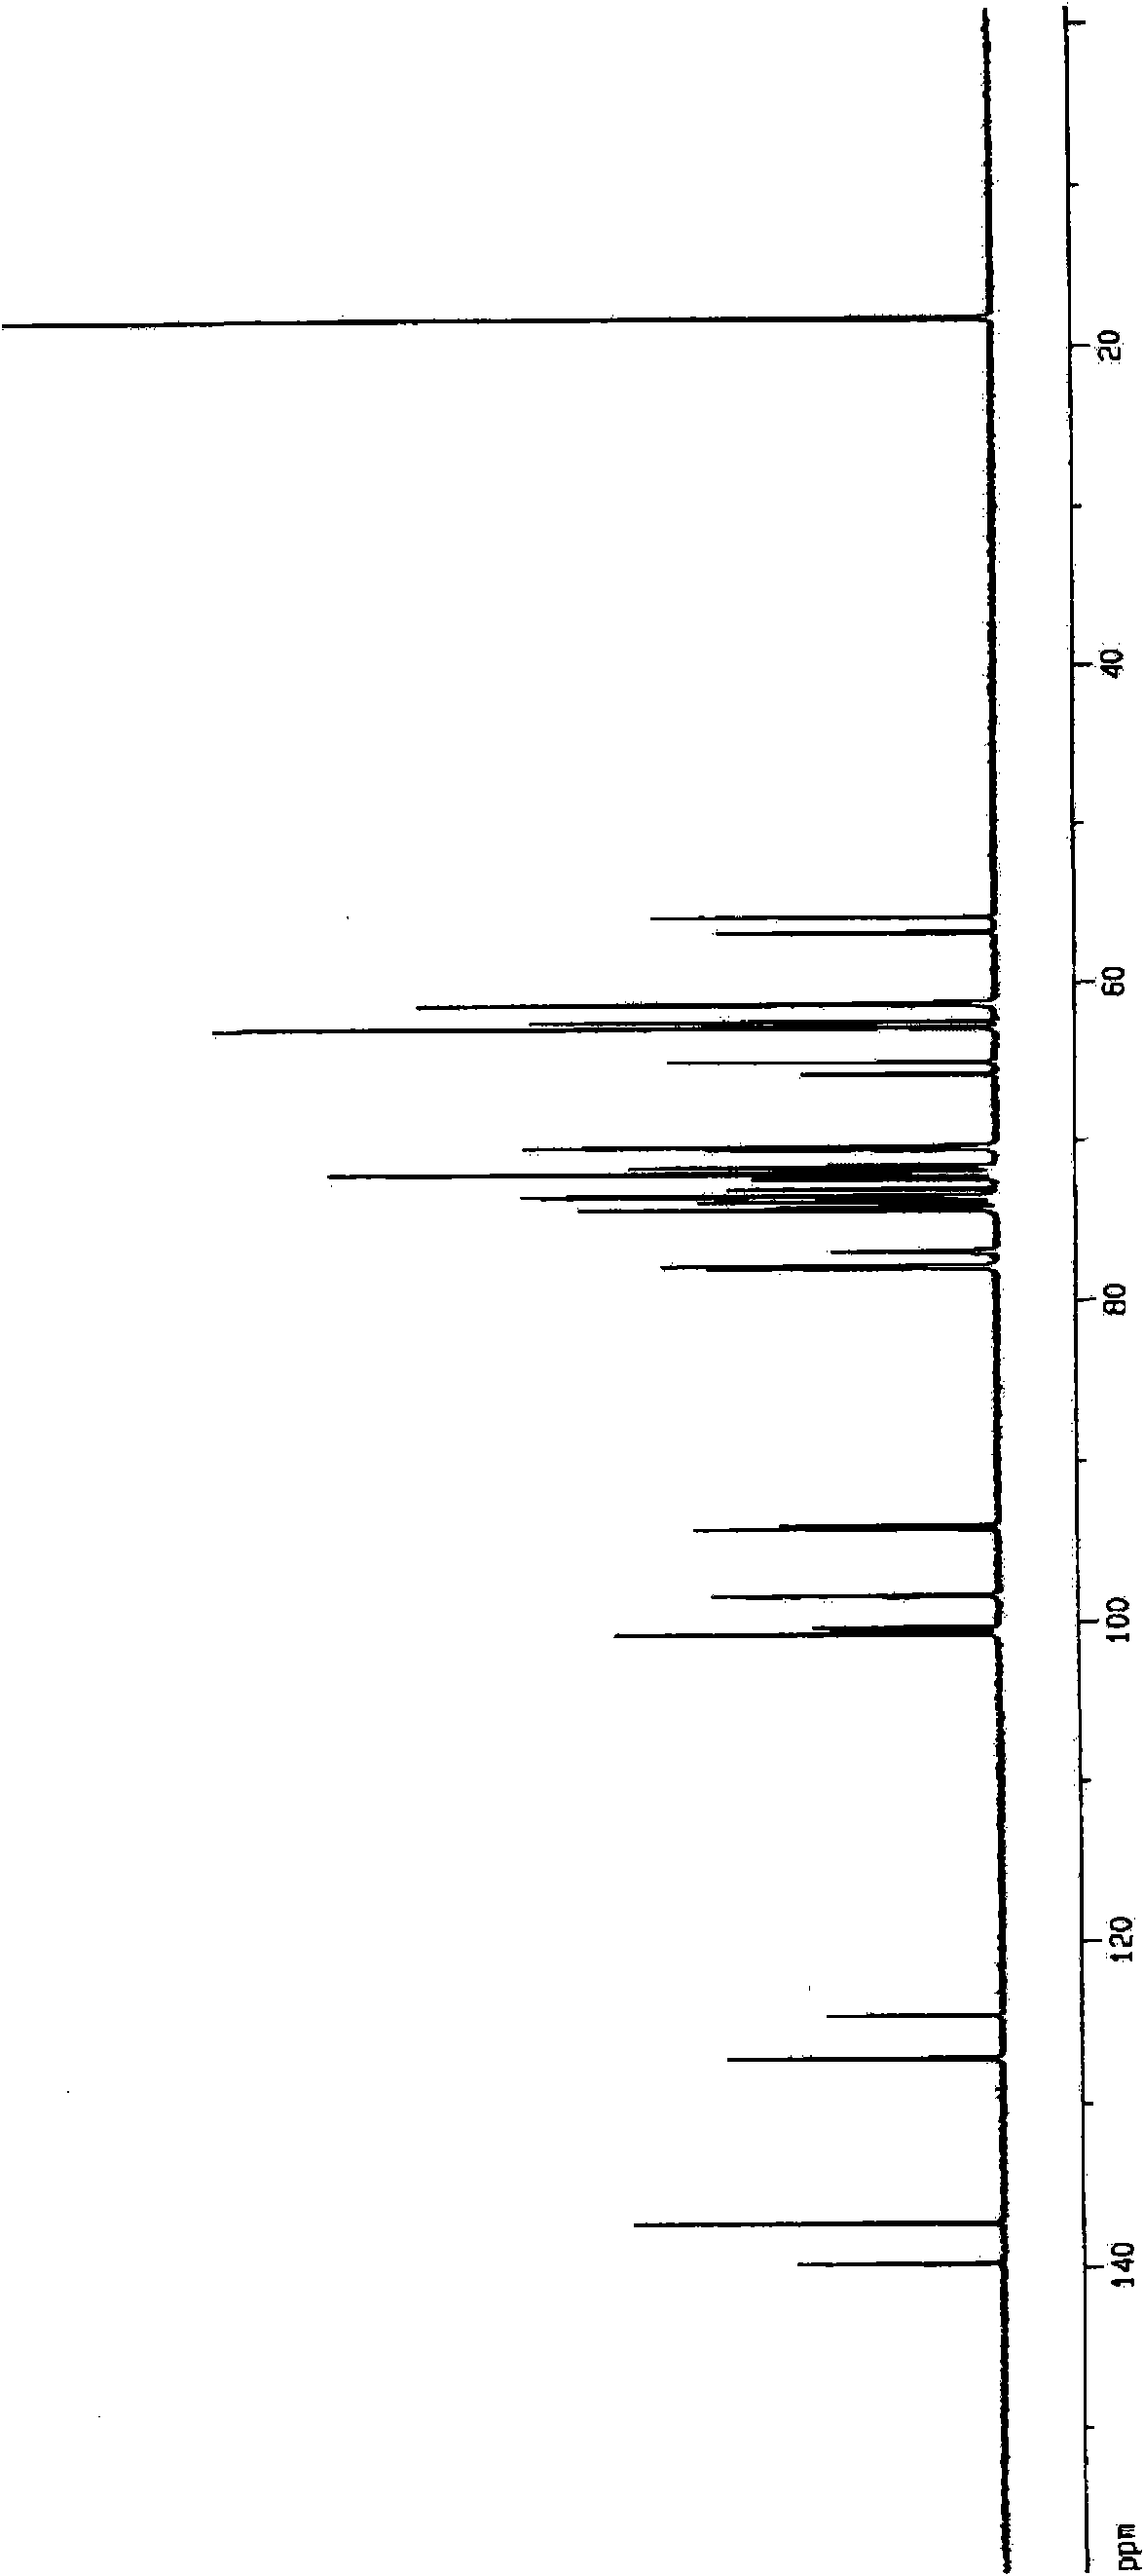 Aminosugar compound and process for production thereof